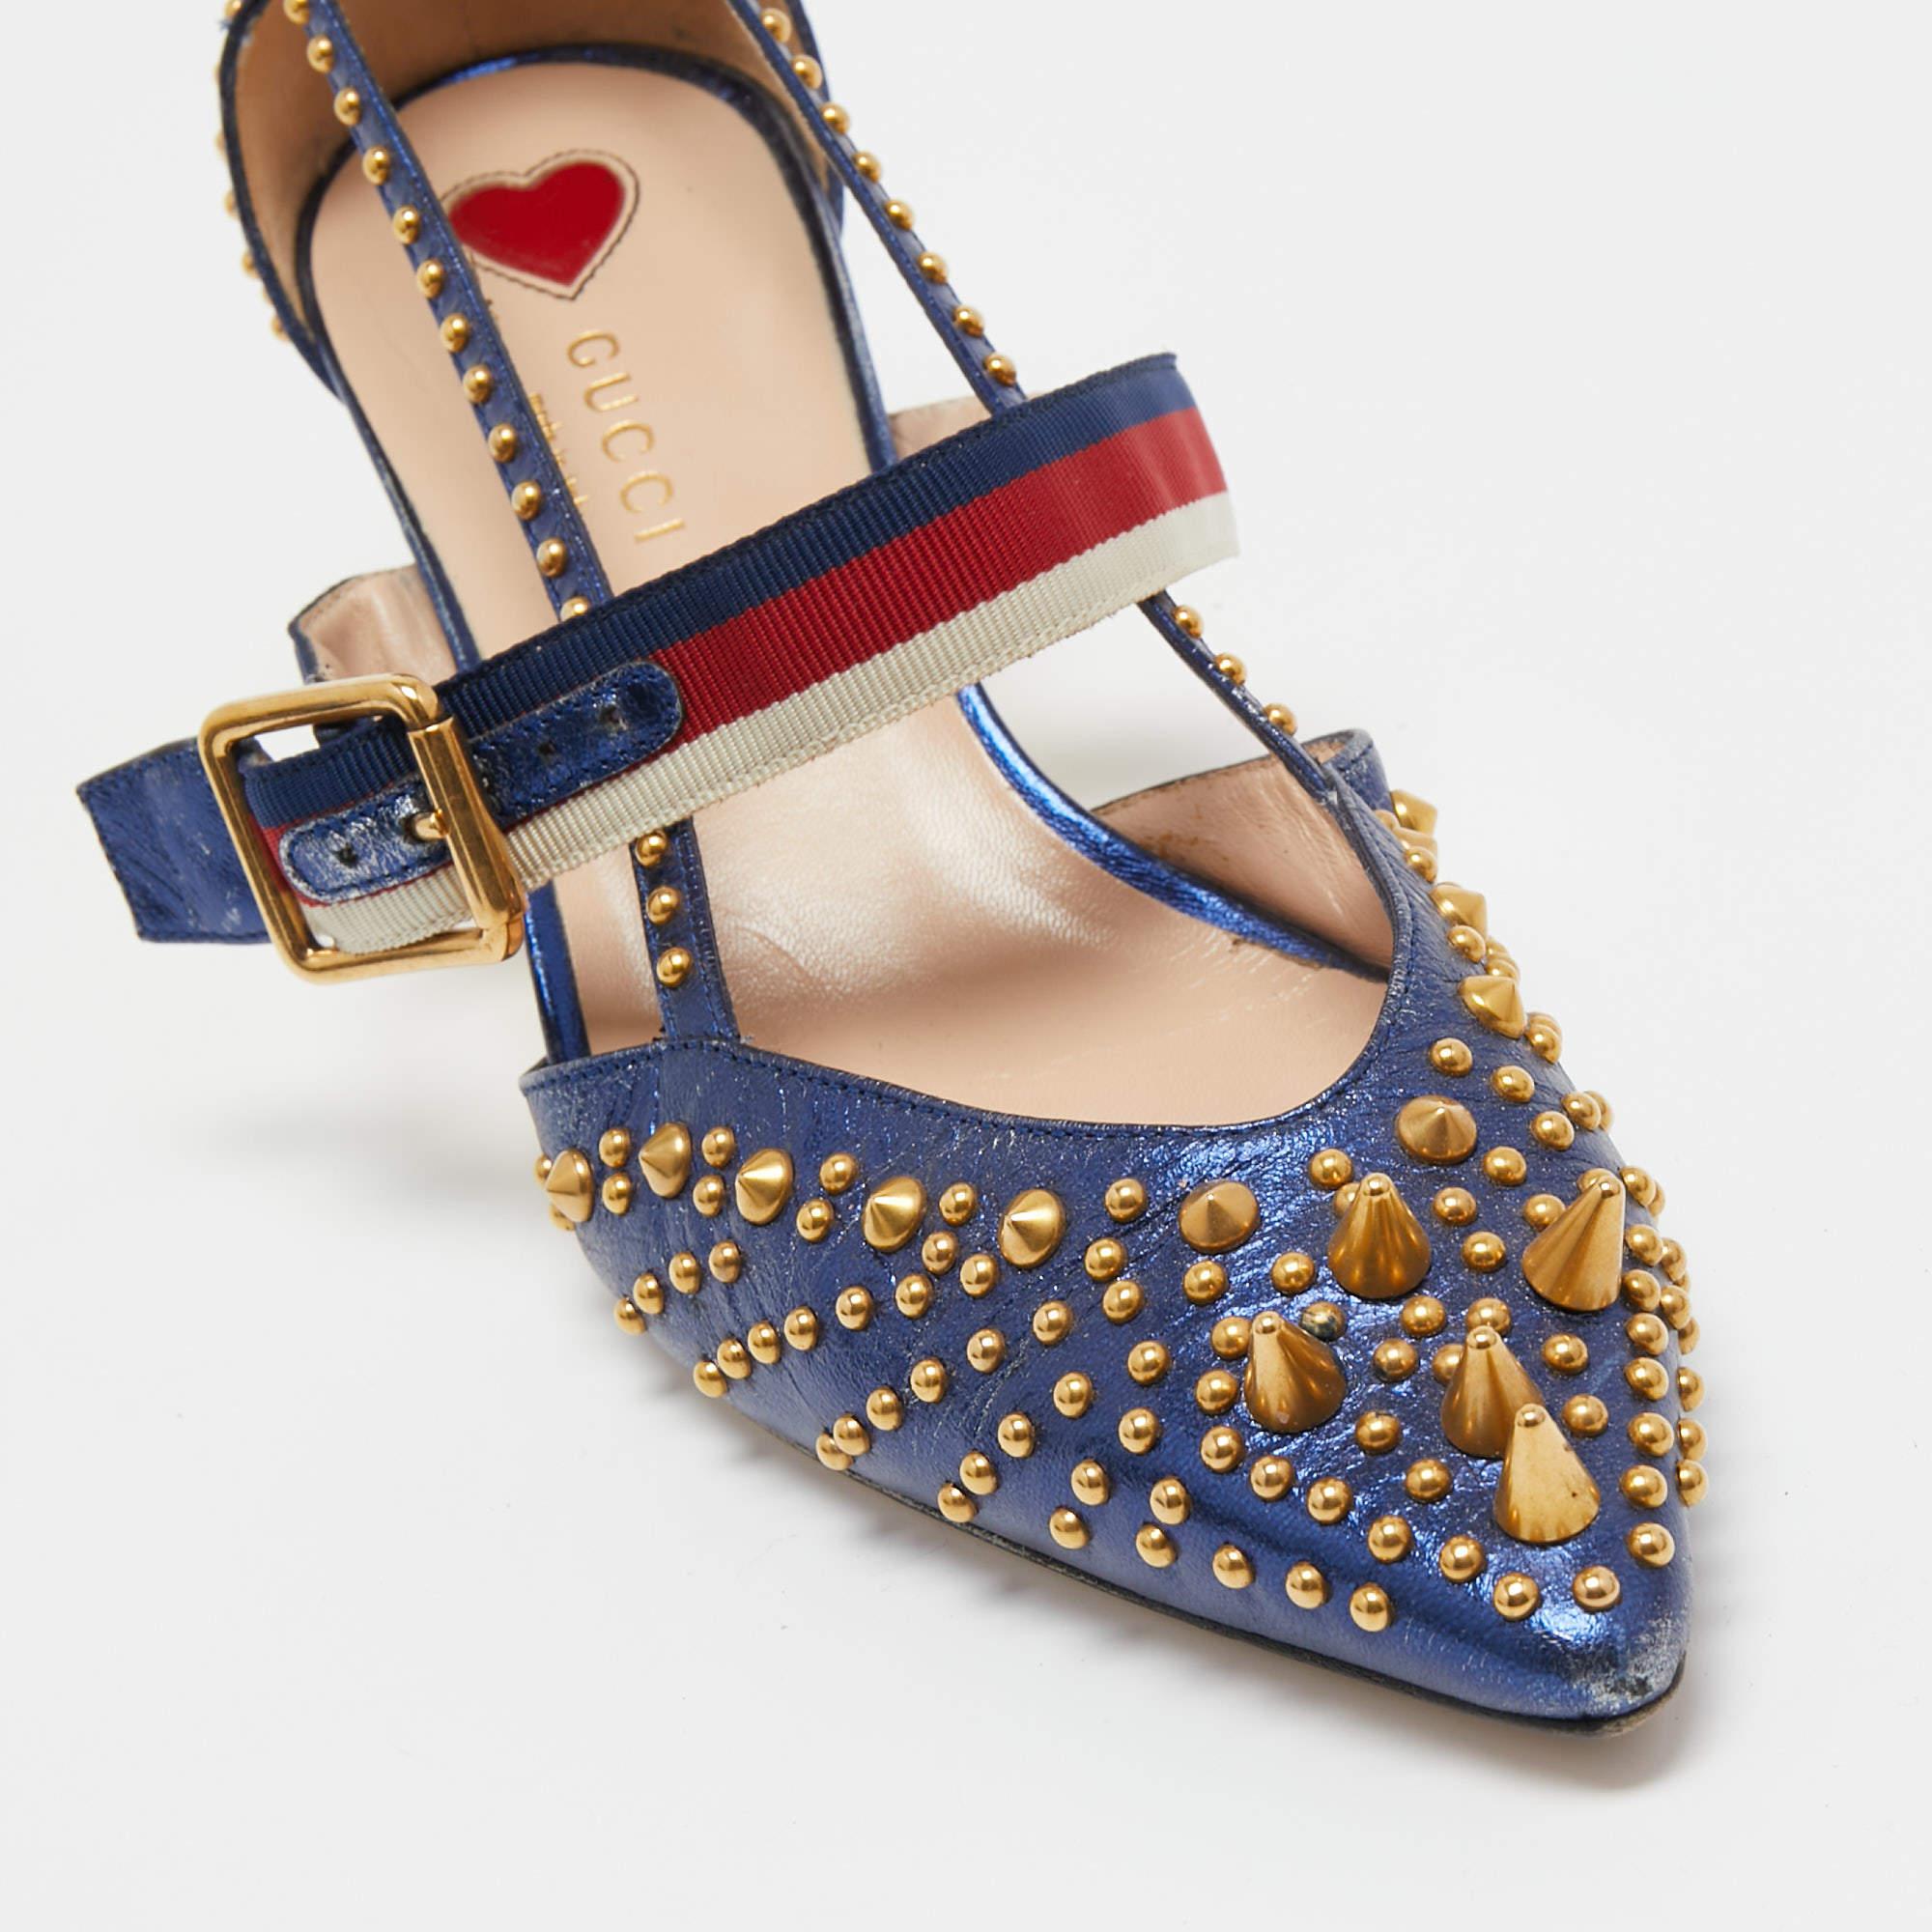 Gucci Metallic Blue Studded Leather Sylvie Mary Jane Pumps Size 37.5 3